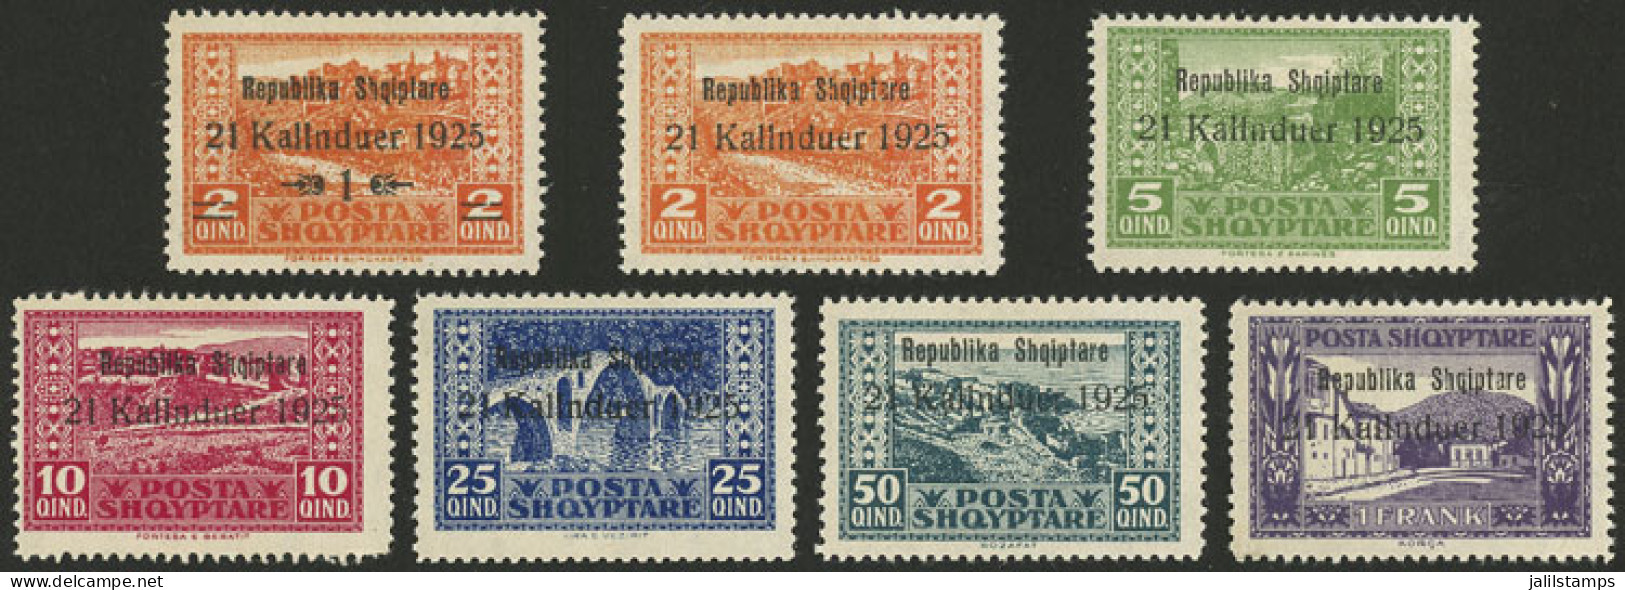 ALBANIA: Sc.171/177, 1925 Proclamation Of The Republic, Compl. Set Of 7 Overprinted Values, Very Fine Quality! - Albanie